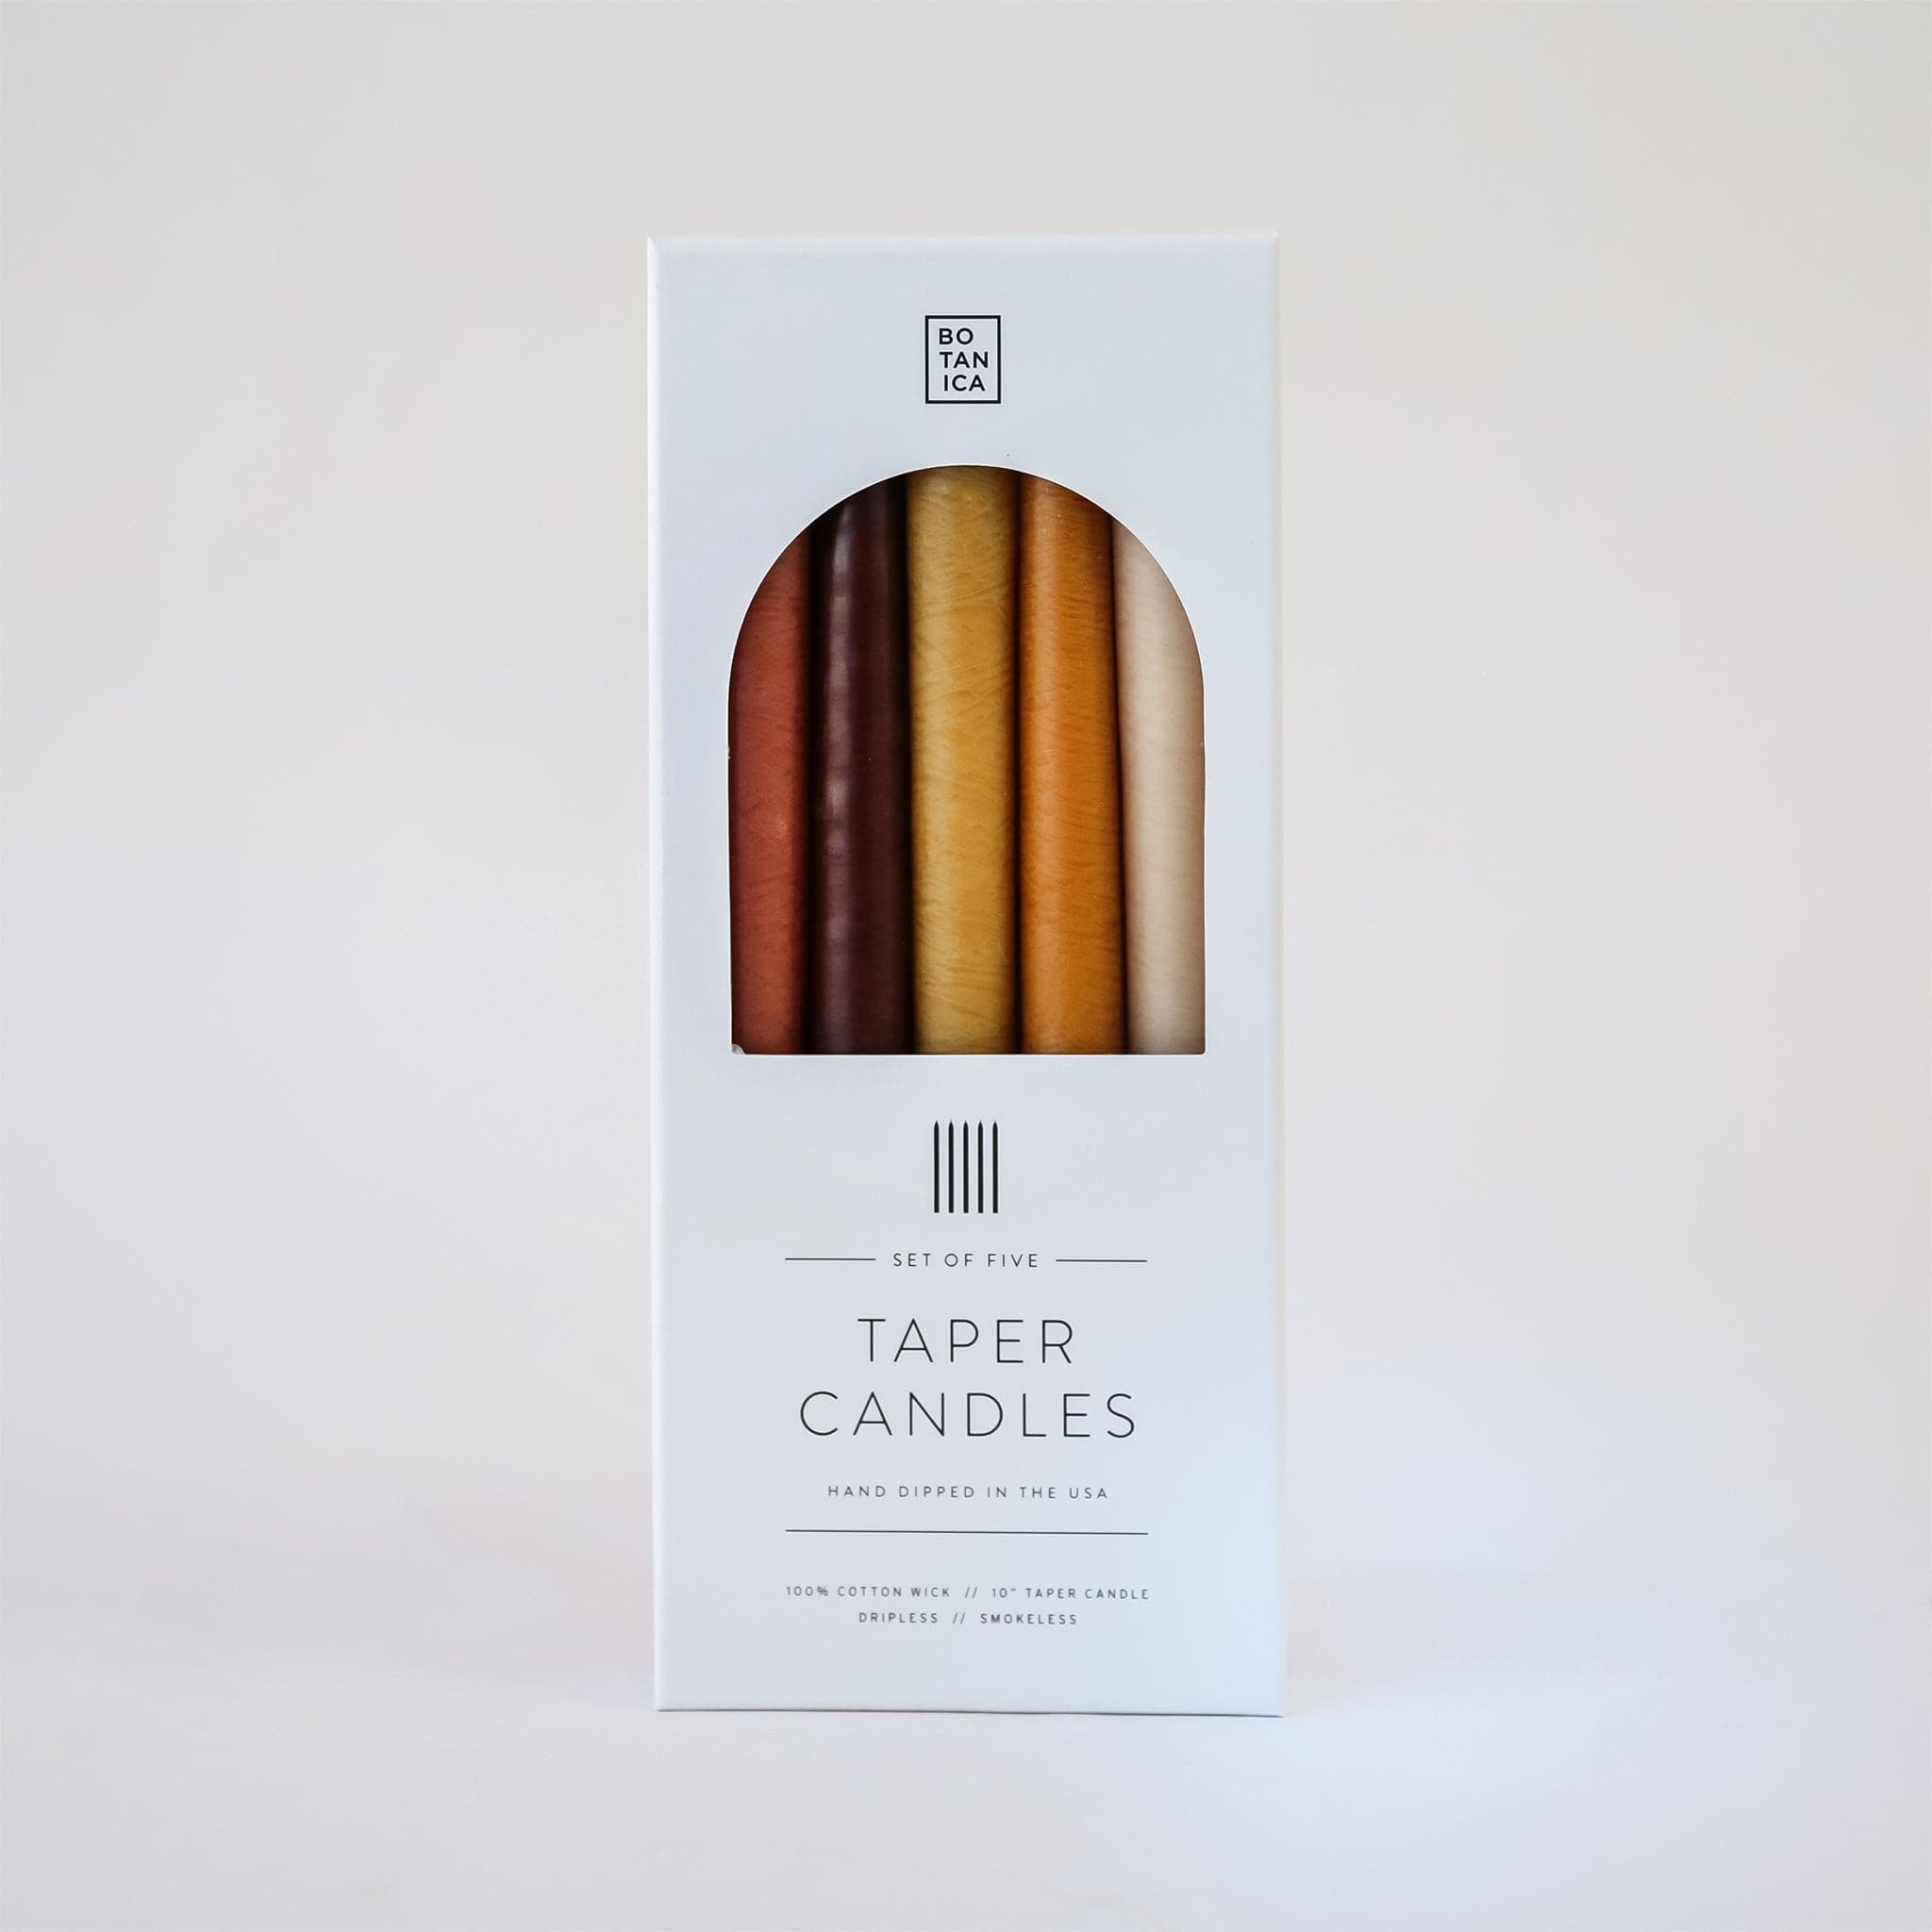 Set of five, 10 inch taper candles that come in deep warm toned natural colors packaged in white Botanica branded box.